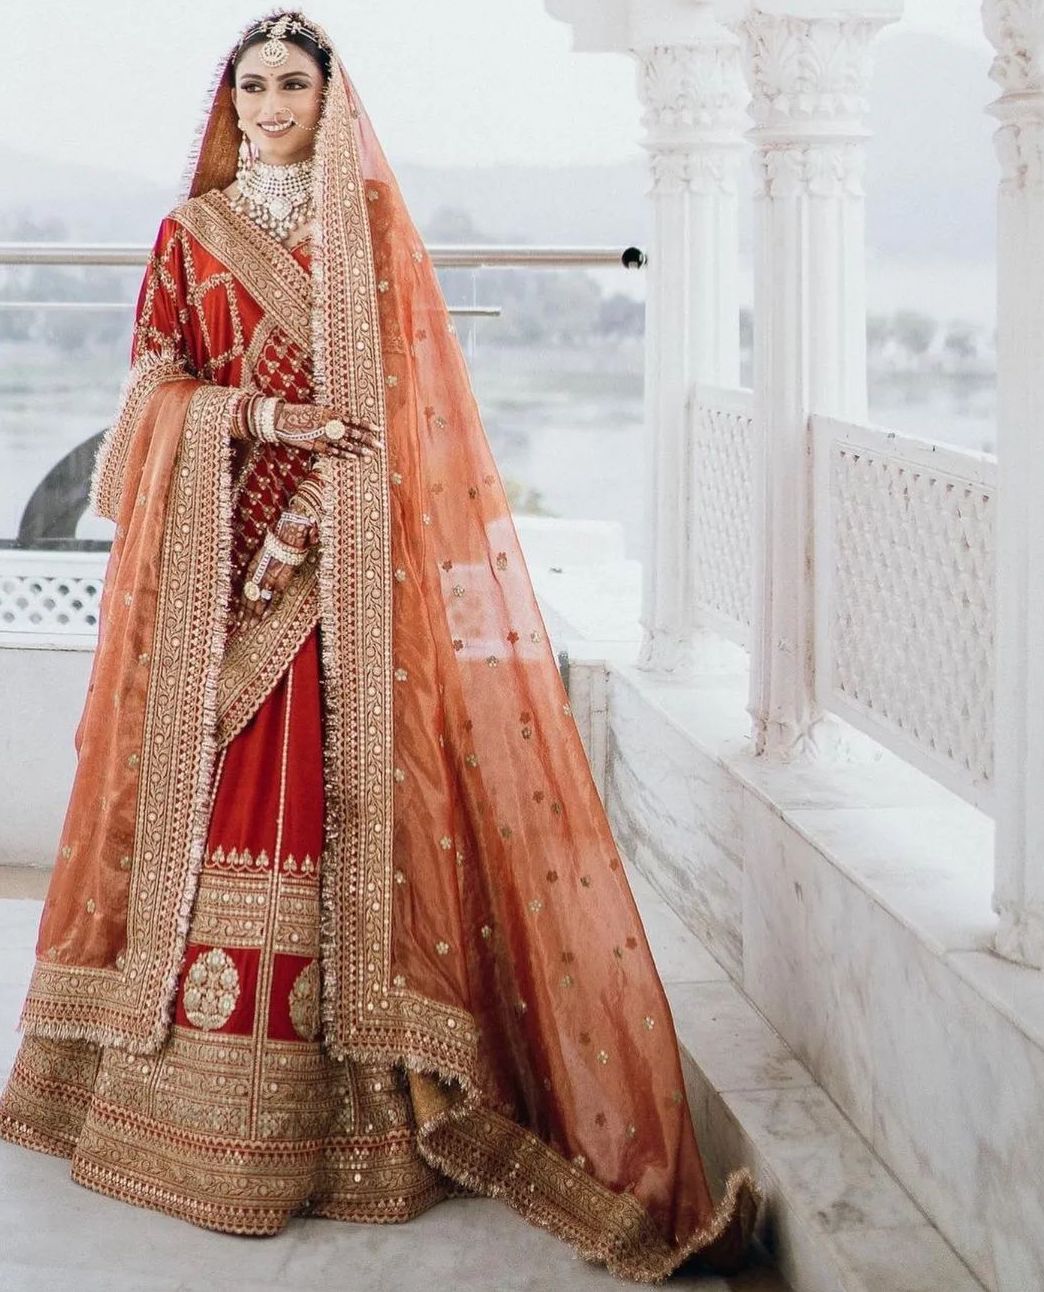 7 Alluring Rajasthani Wedding Dresses for Guests and the Bride